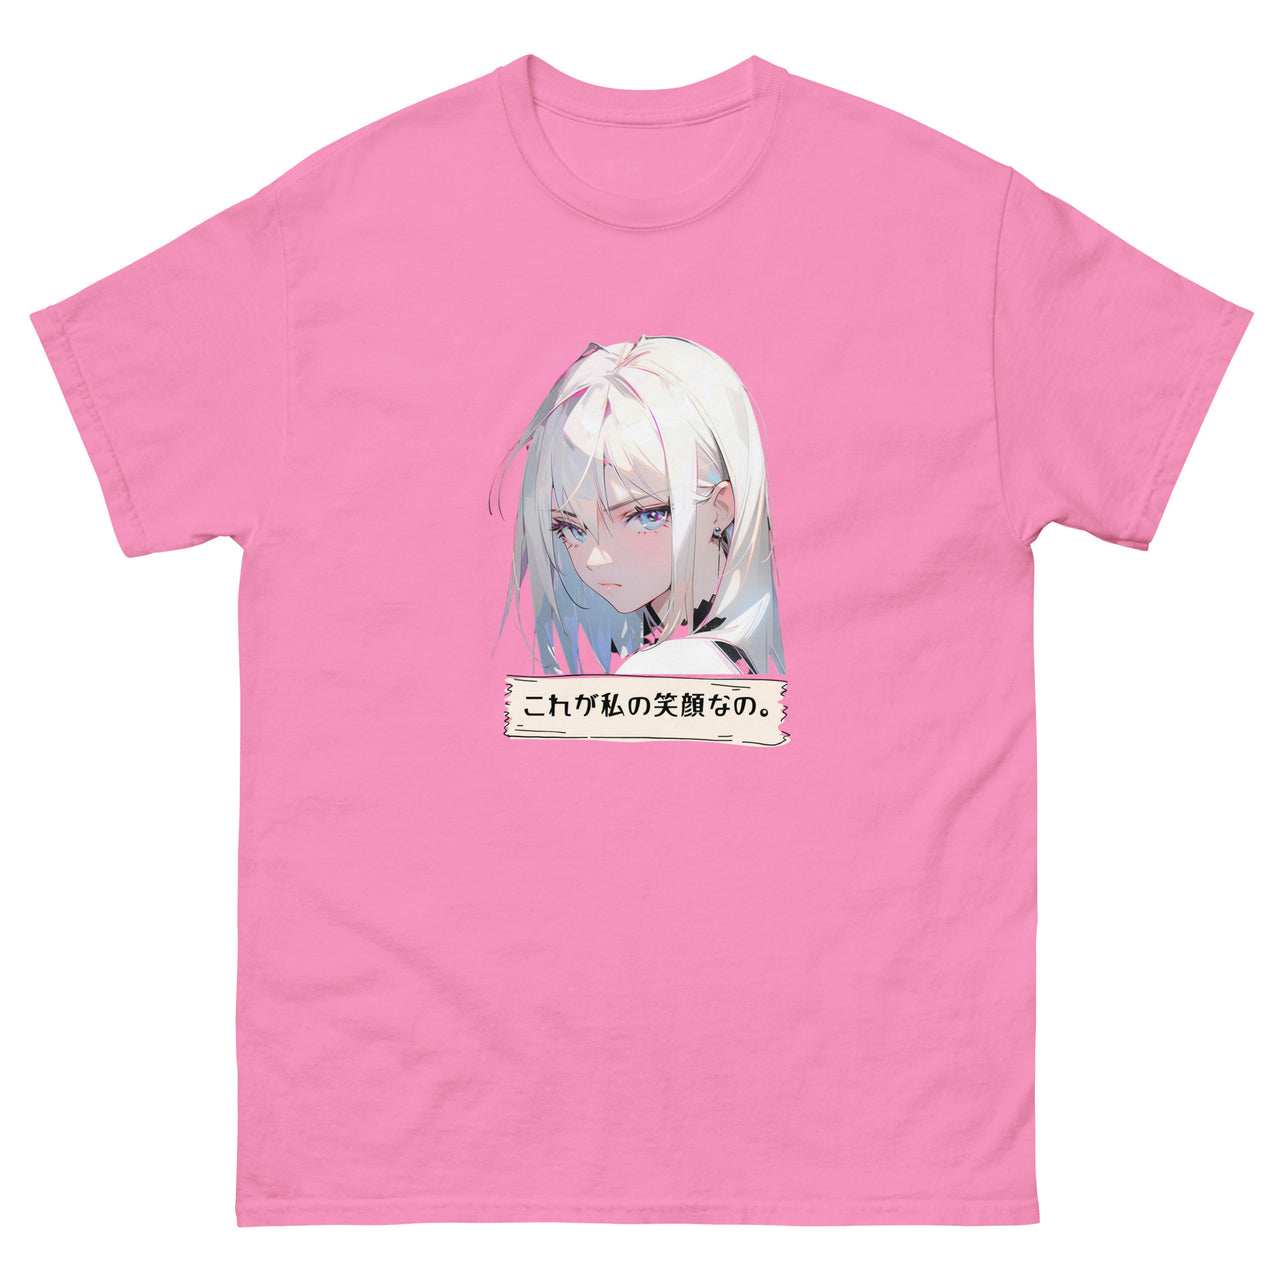 This is my Smiling Face Anime Girl Anime-Styled Shirt